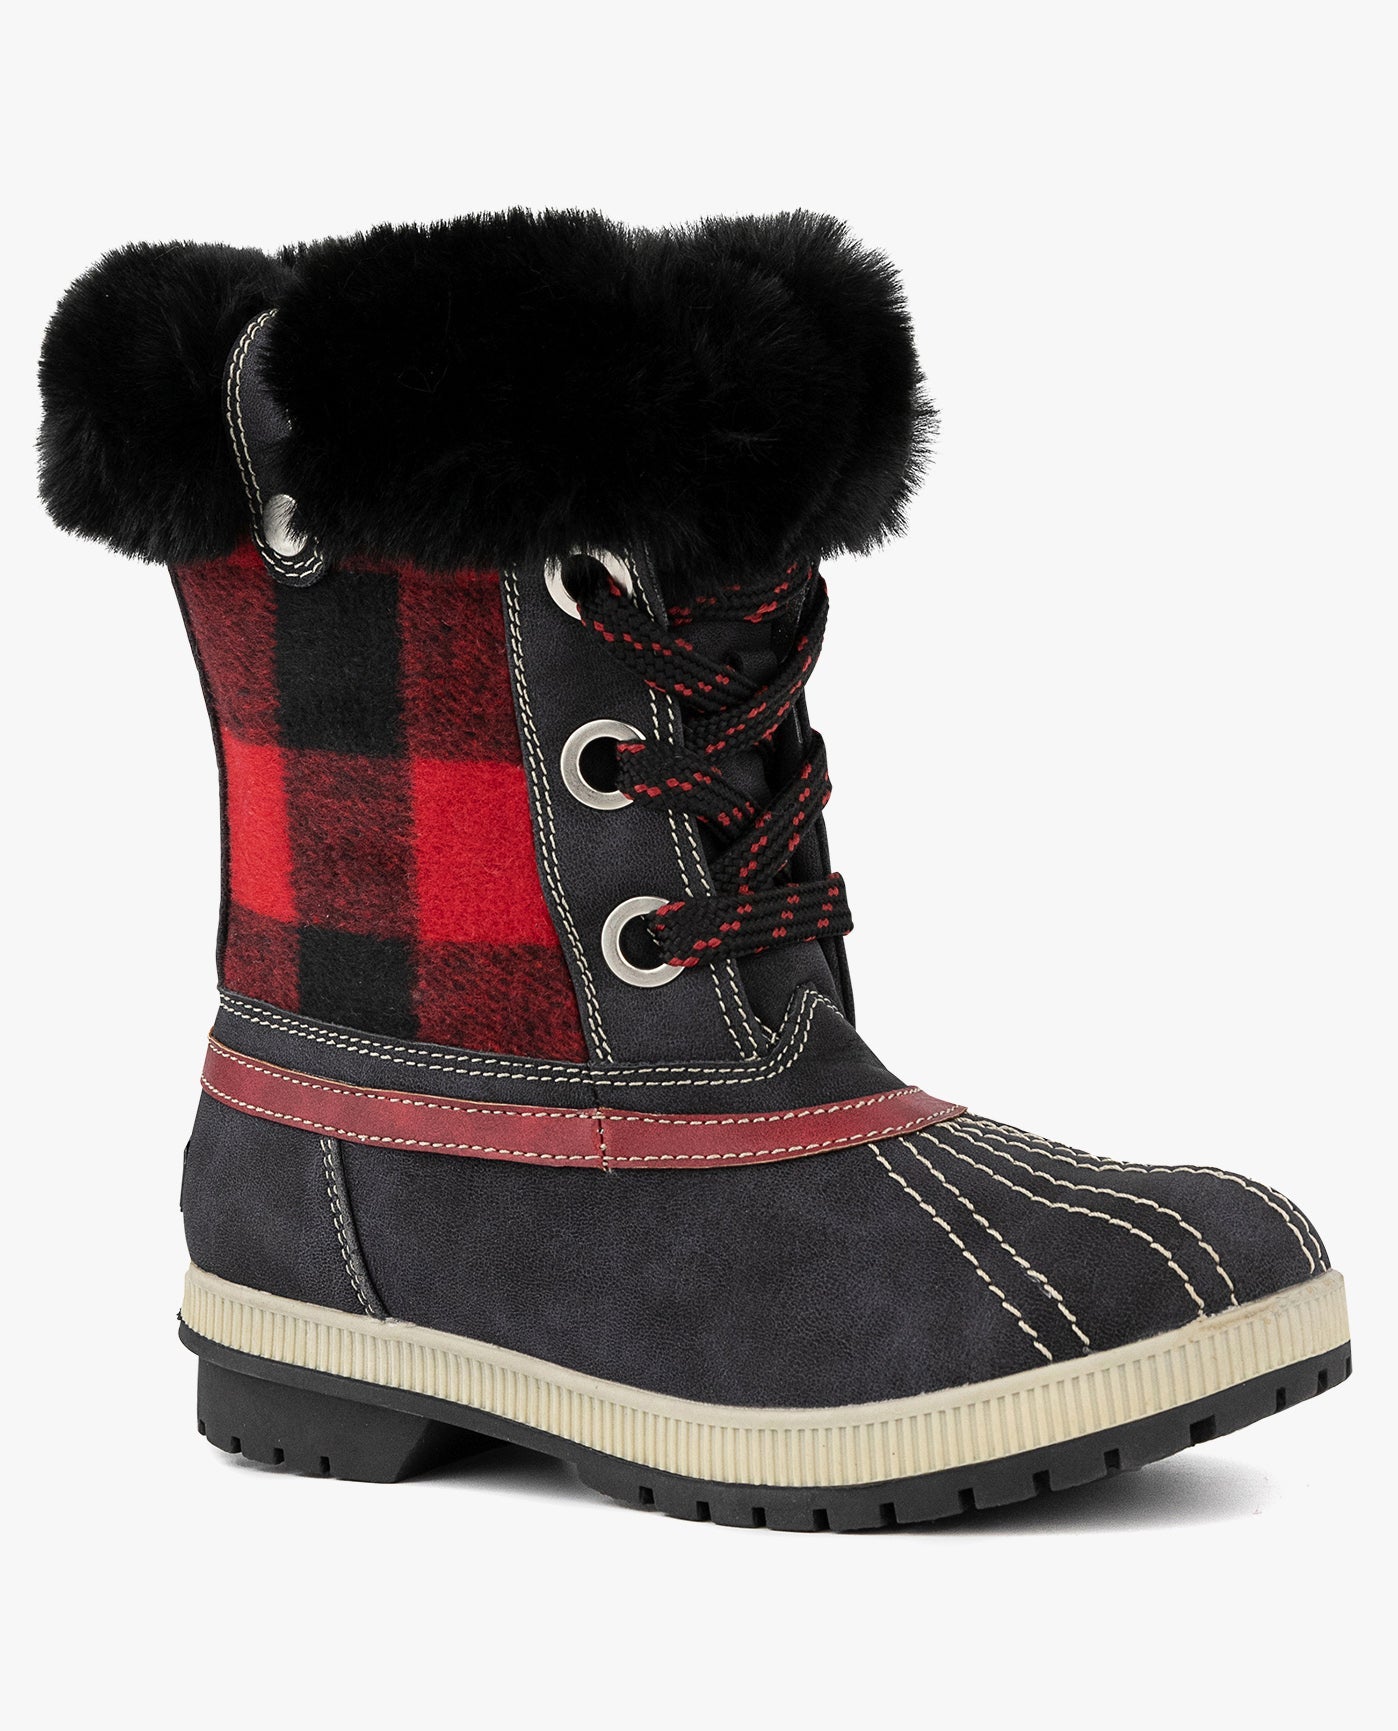 MAIN IMAGE OF WOMENS MILLY WINTER BOOT | ESO_BLACK RED_006